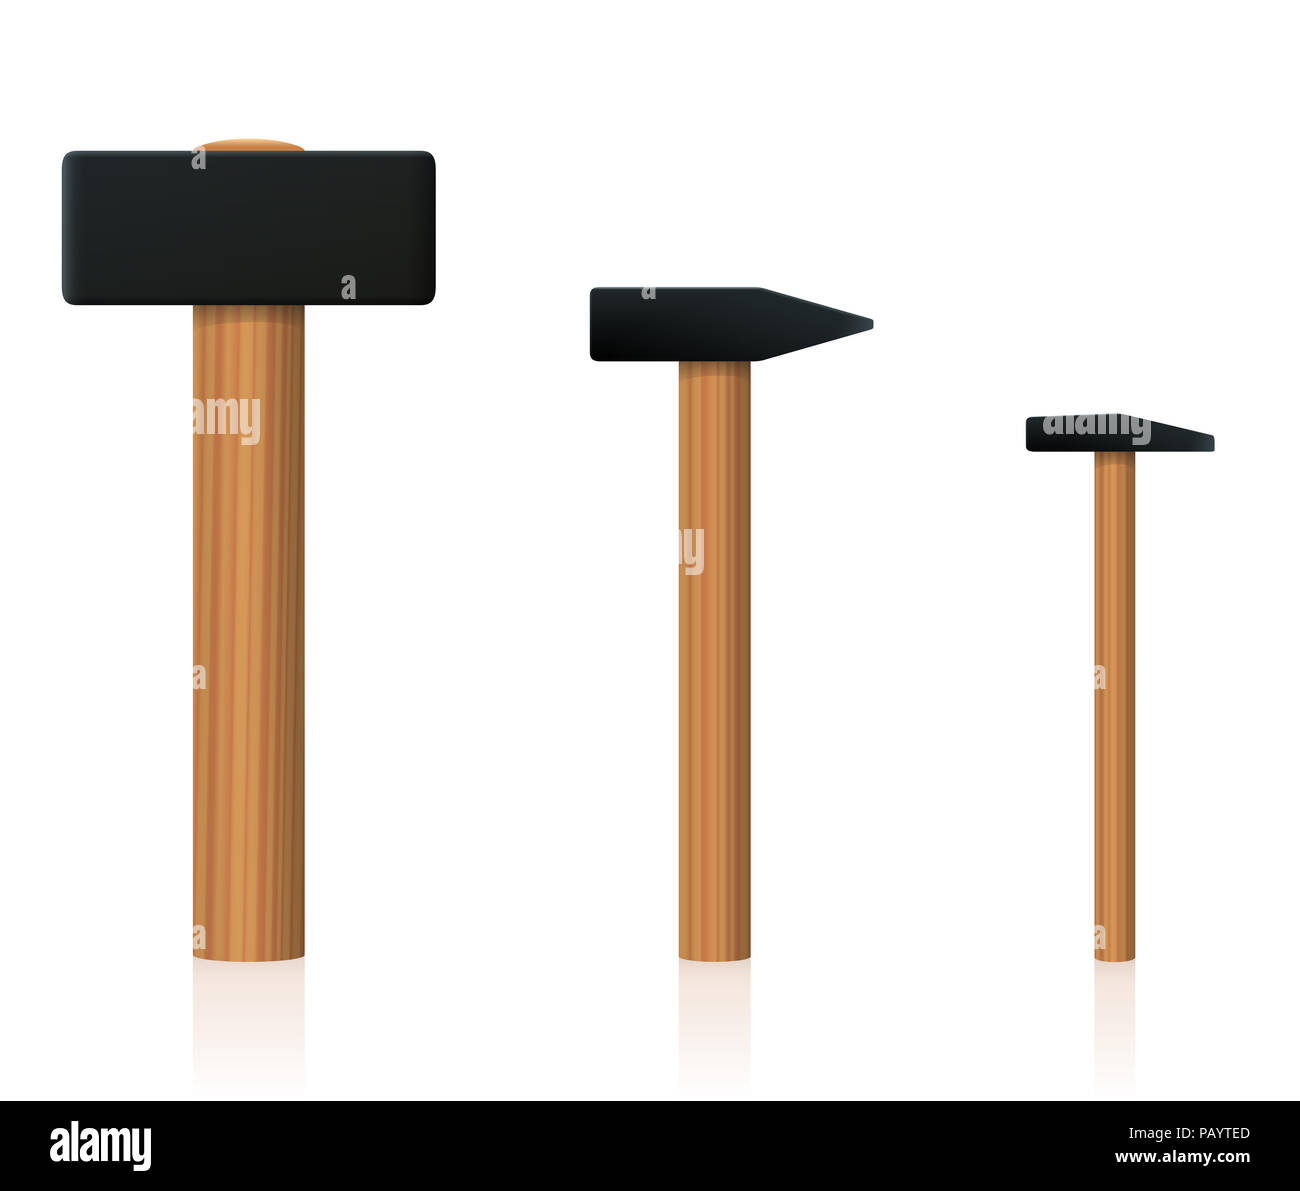 Hammer set. Big, normal and small upright standing basic hand tool to compare different size - illustration on white background. Stock Photo